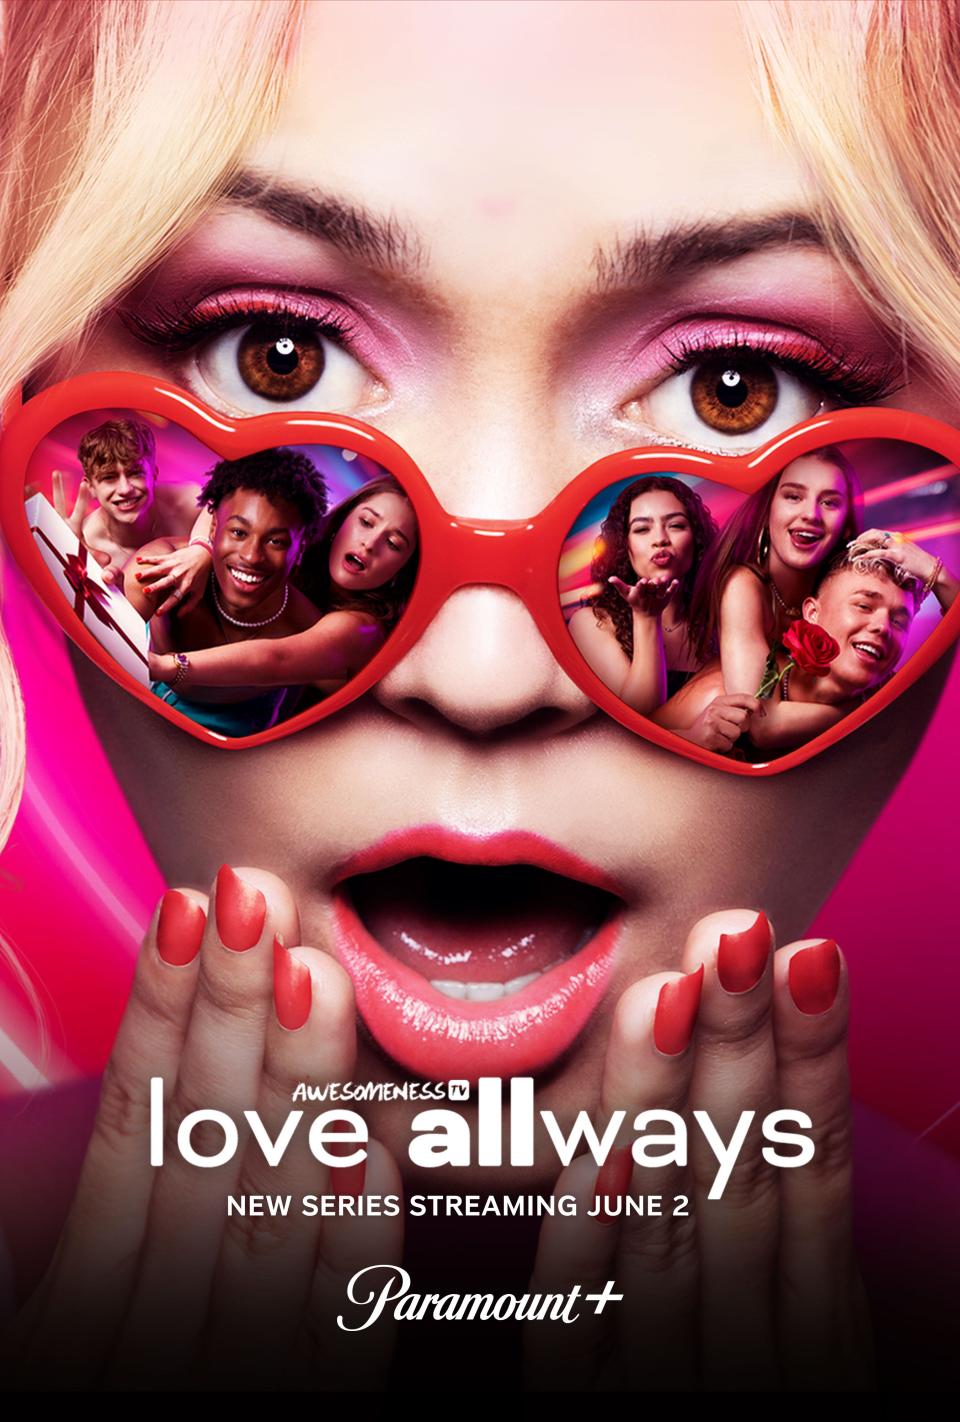 A publicity image for the new Paramount+ dating series "Love Allways," starring former Naples resident Lexi Paloma.